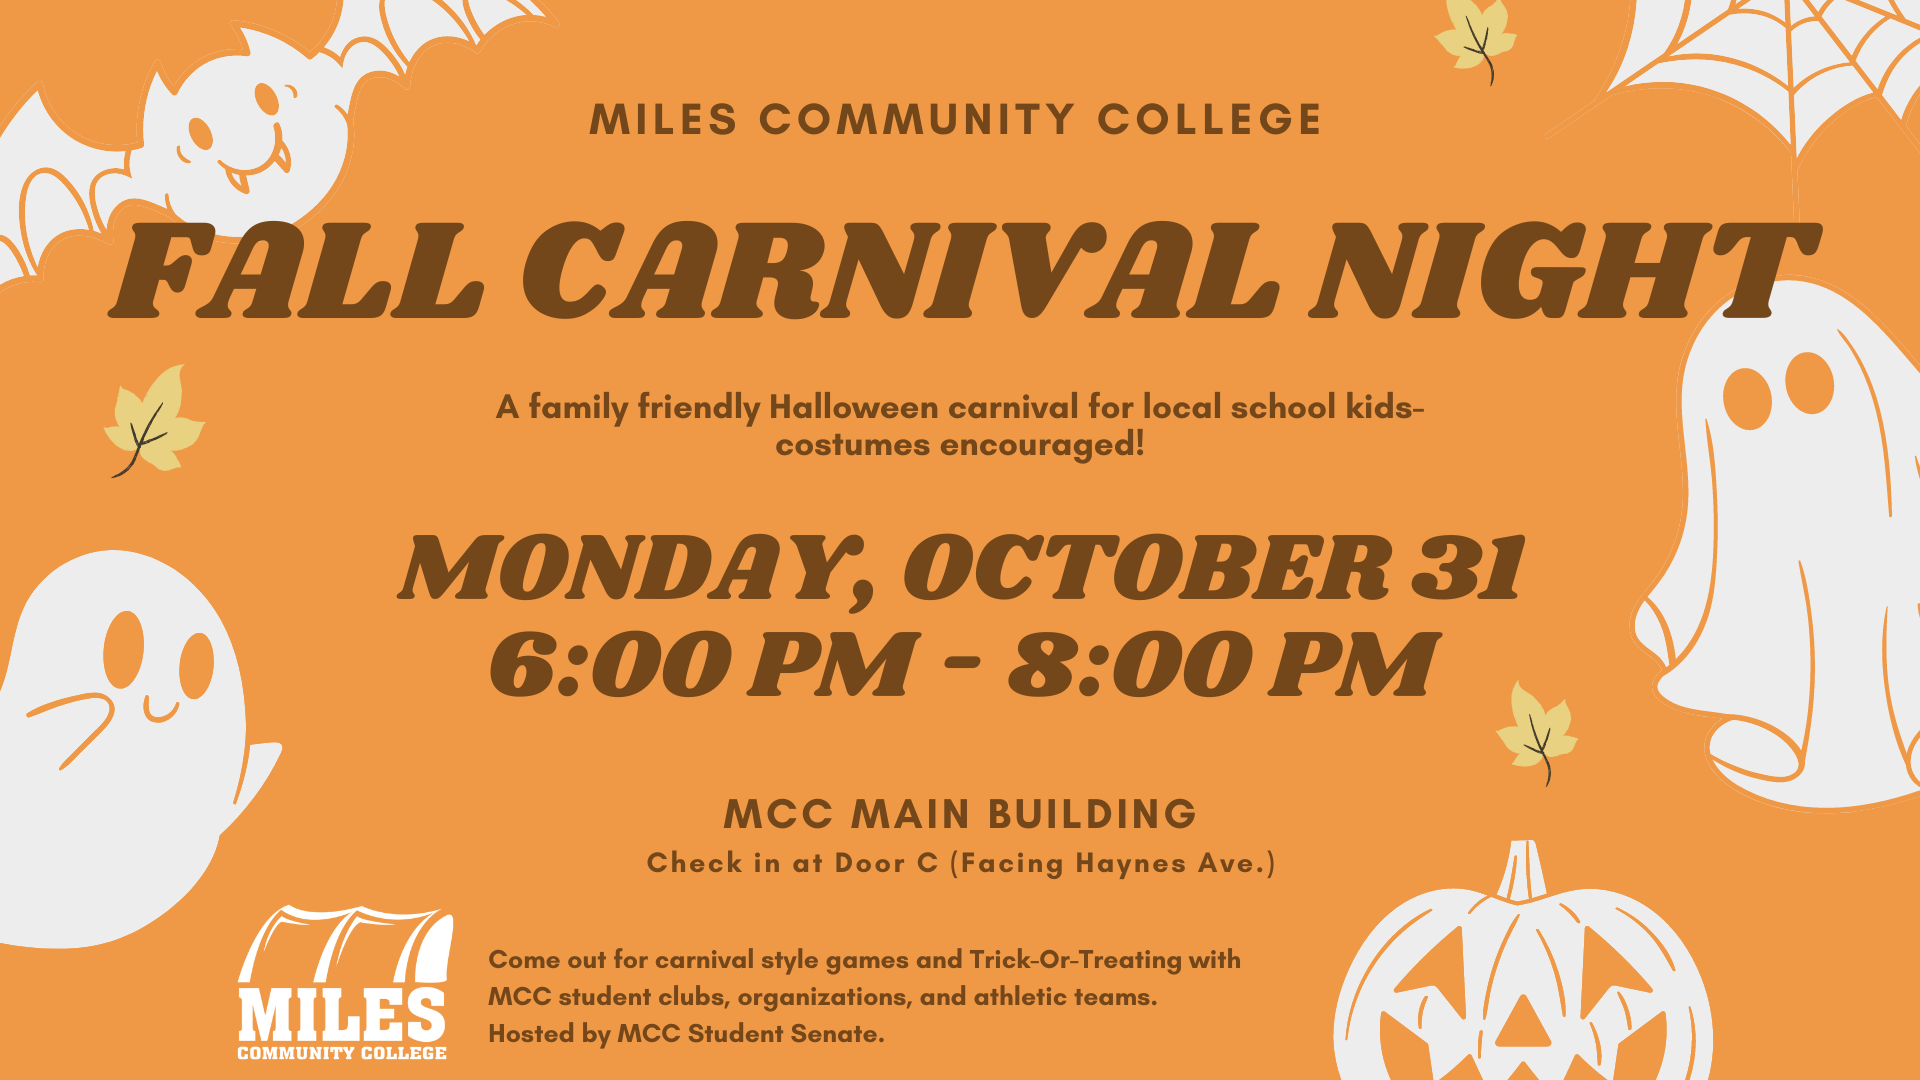 Graphic of Fall Carnival Night (Event details)